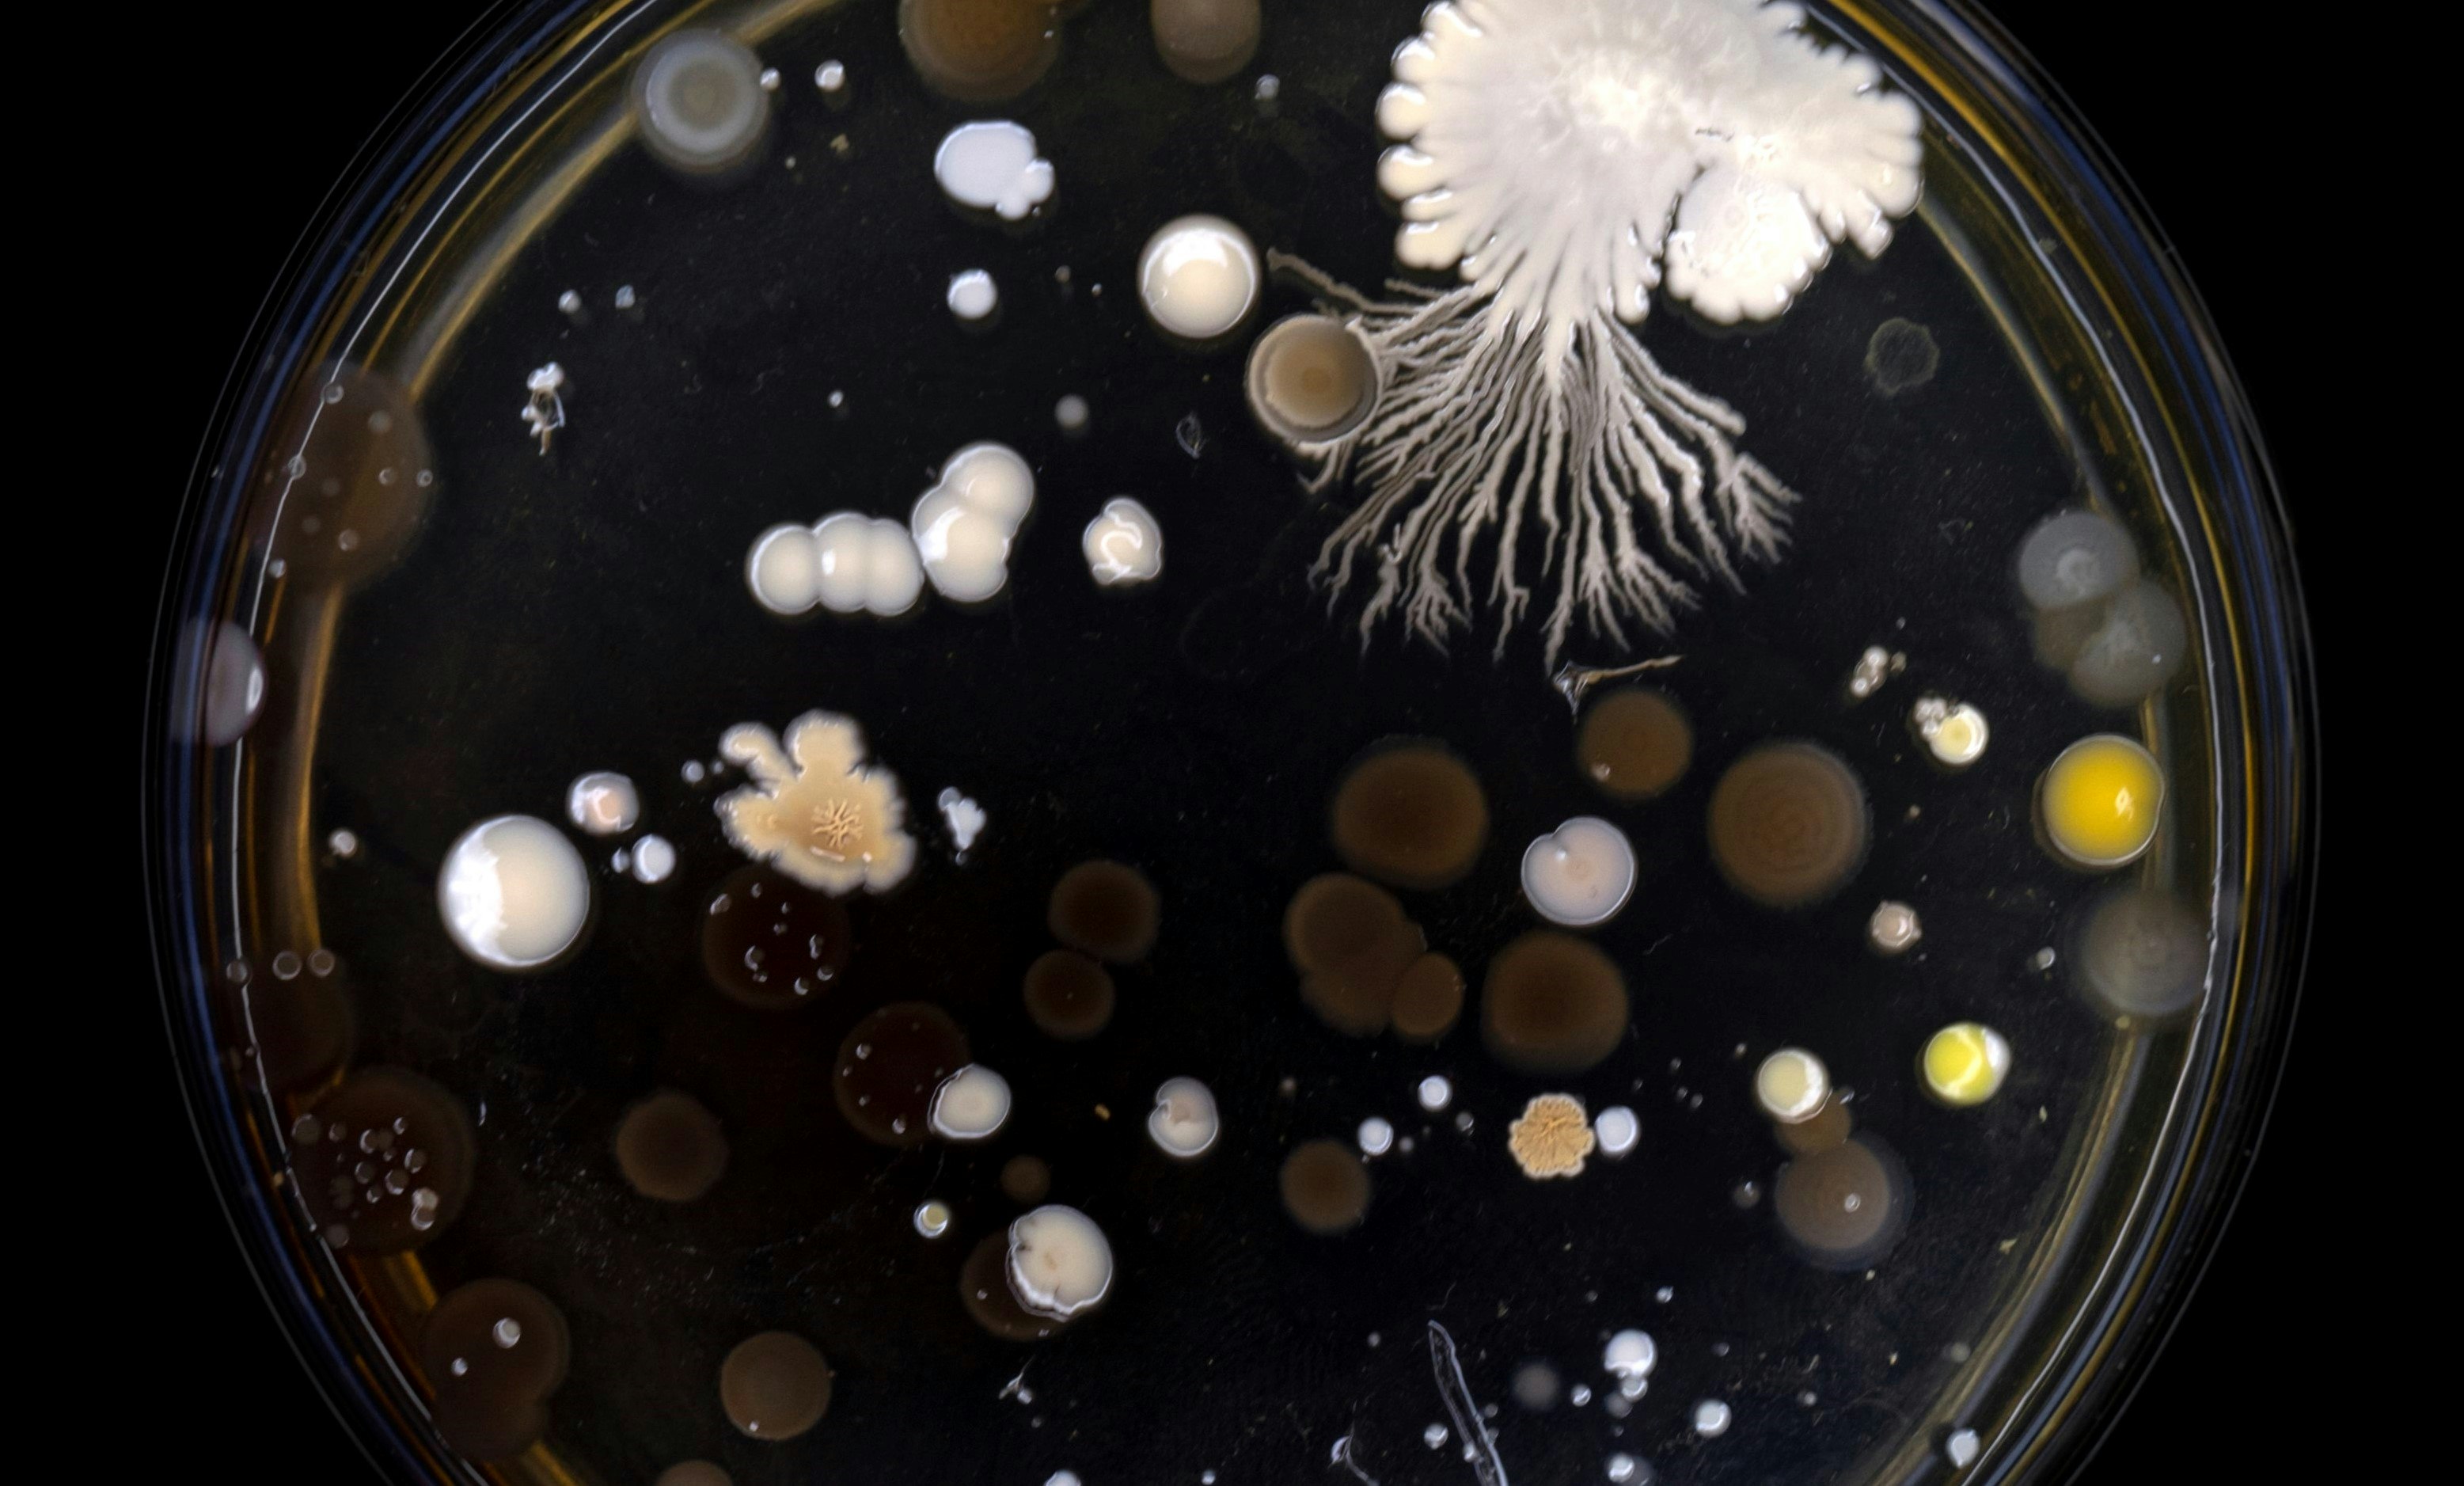 Colonies of bacteria grown in a Petri dish with a nutrient medium after touching the surface of the coins